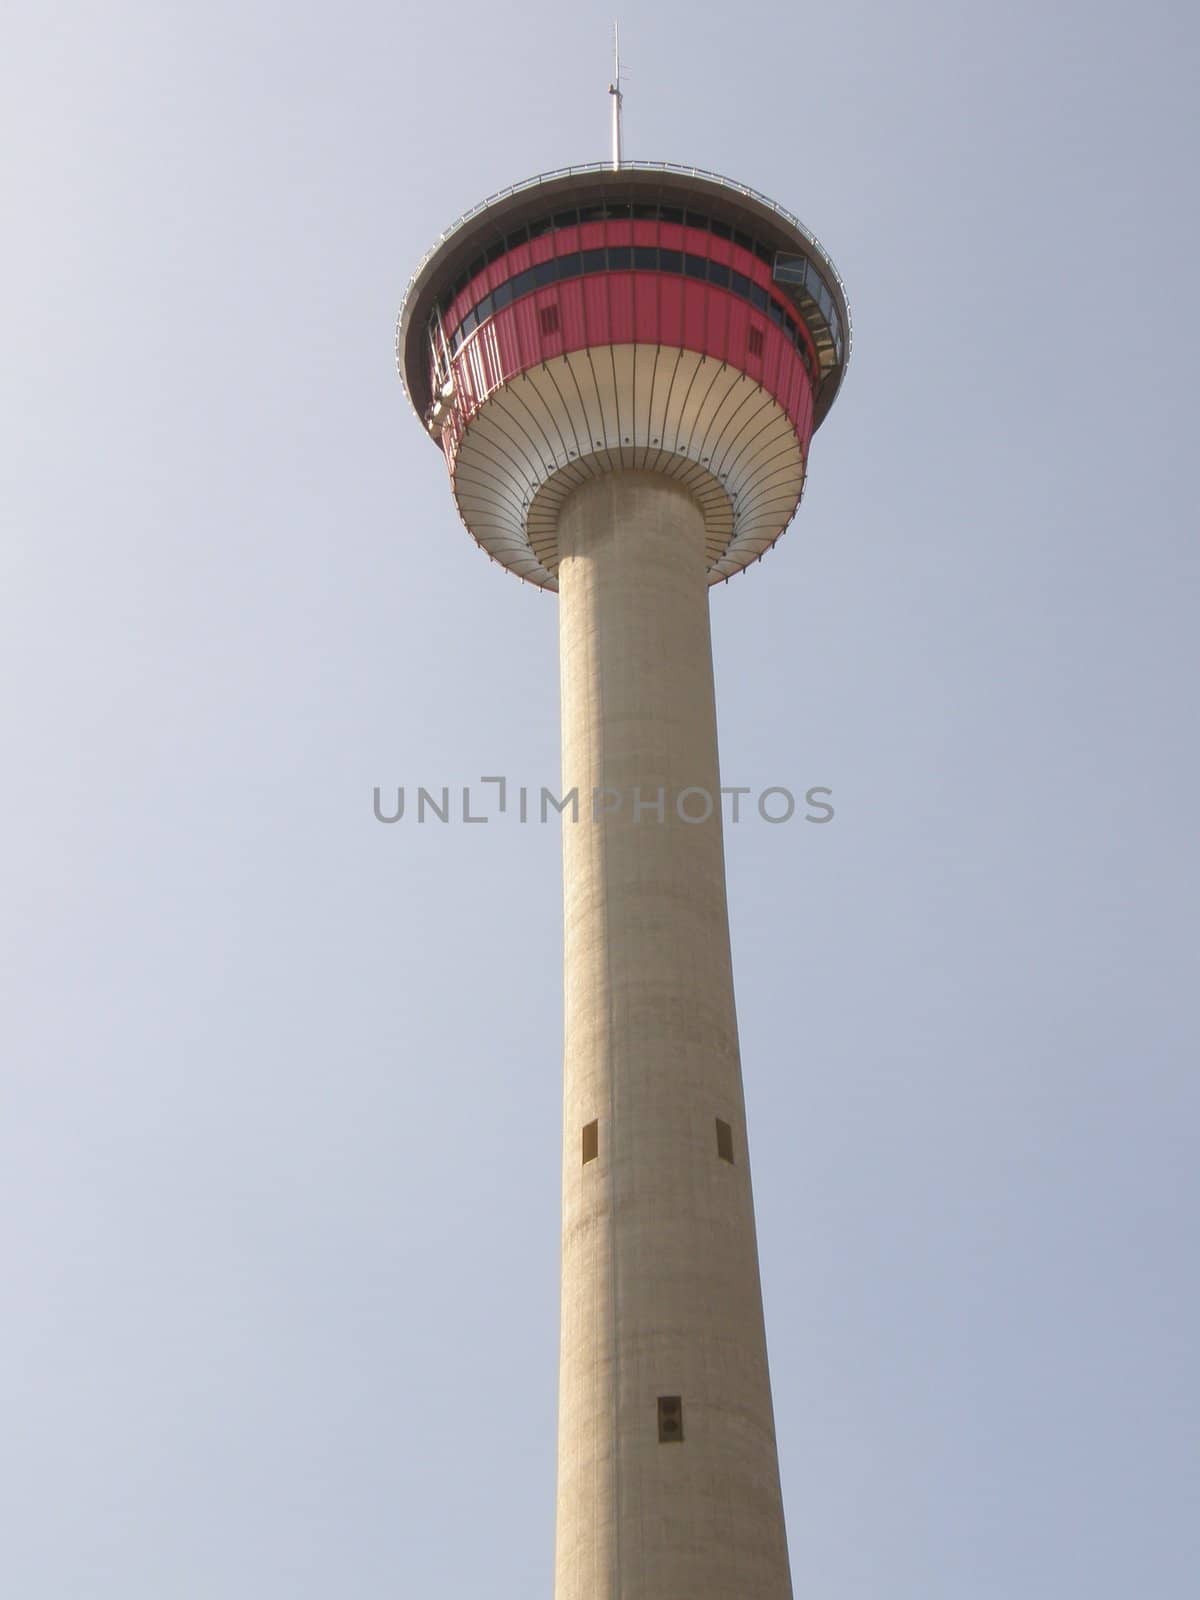 Calgary Tower in Canada